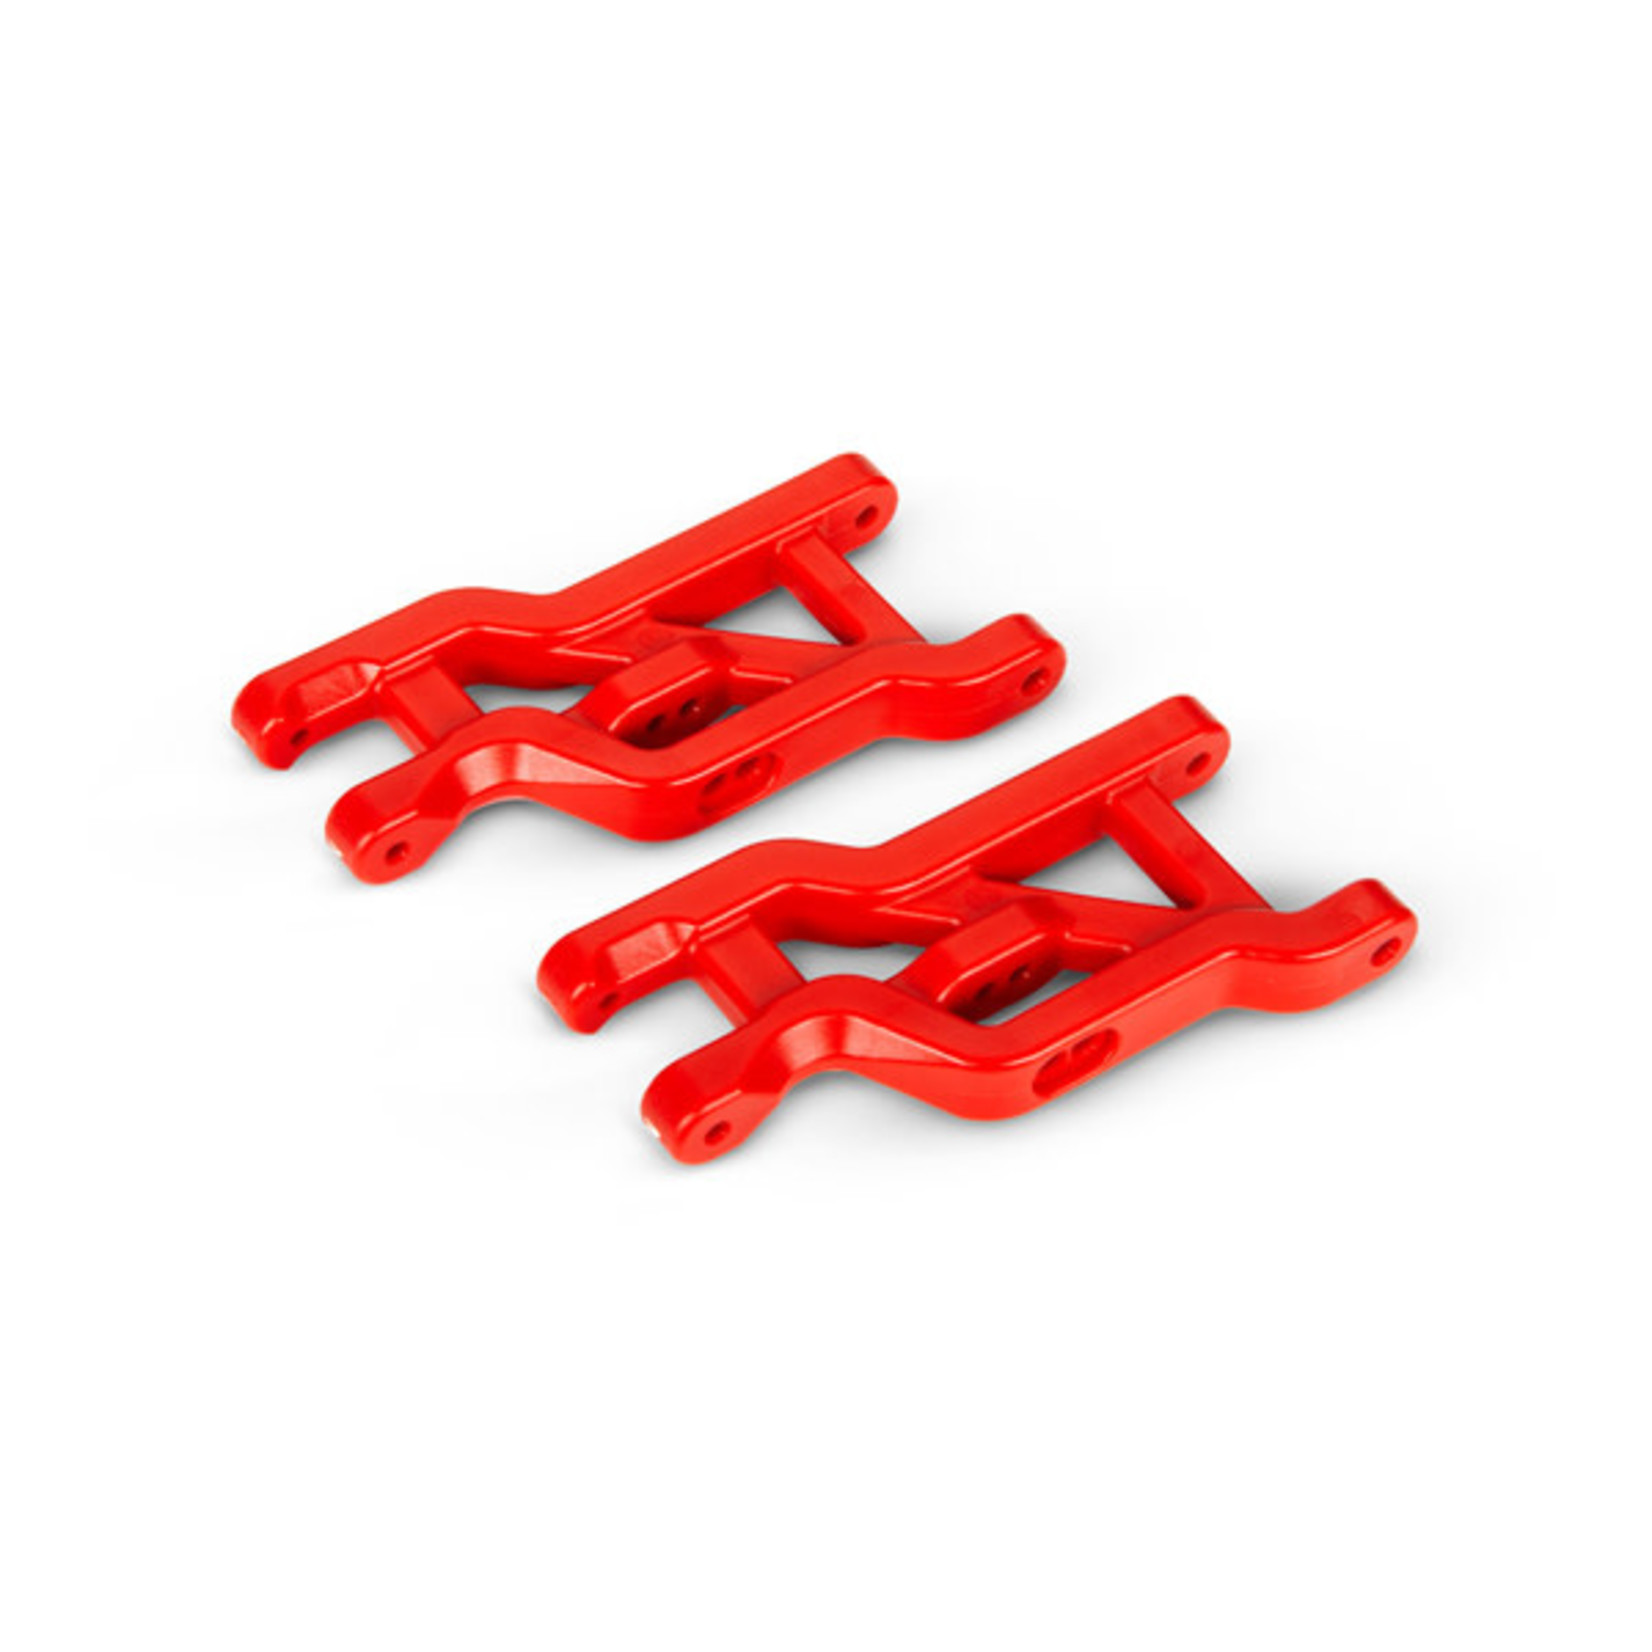 Traxxas Traxxas Front Heavy Duty Suspension Arms (Red) (2) #2531R